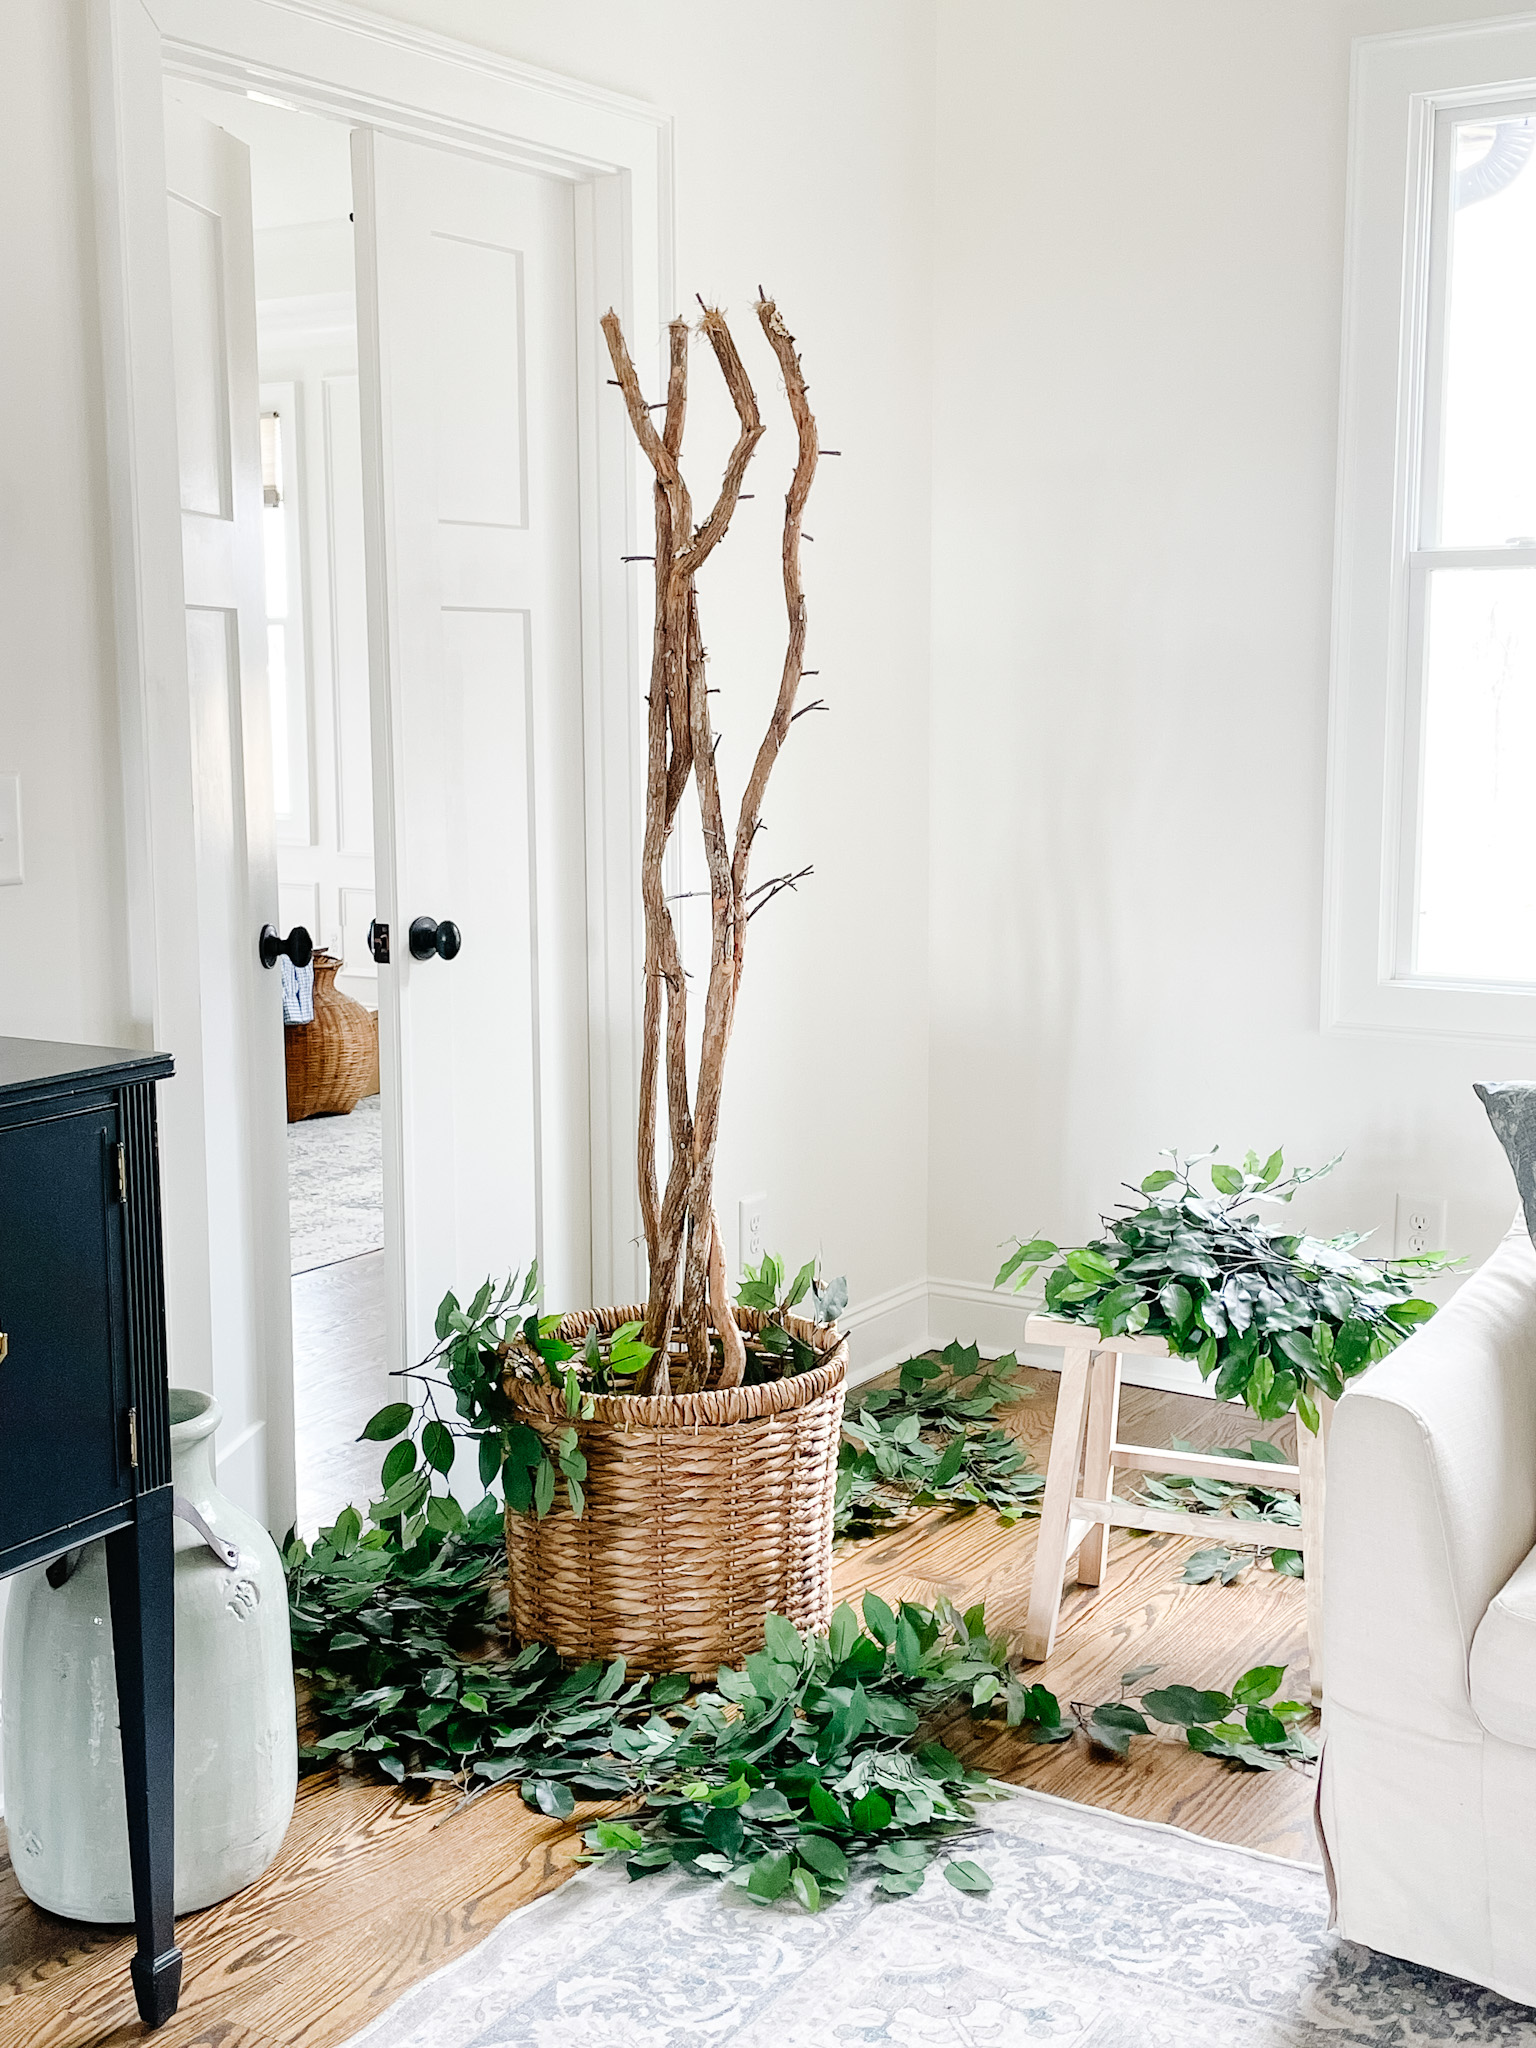 faux ficus tree with leaves removed and laying on the floor